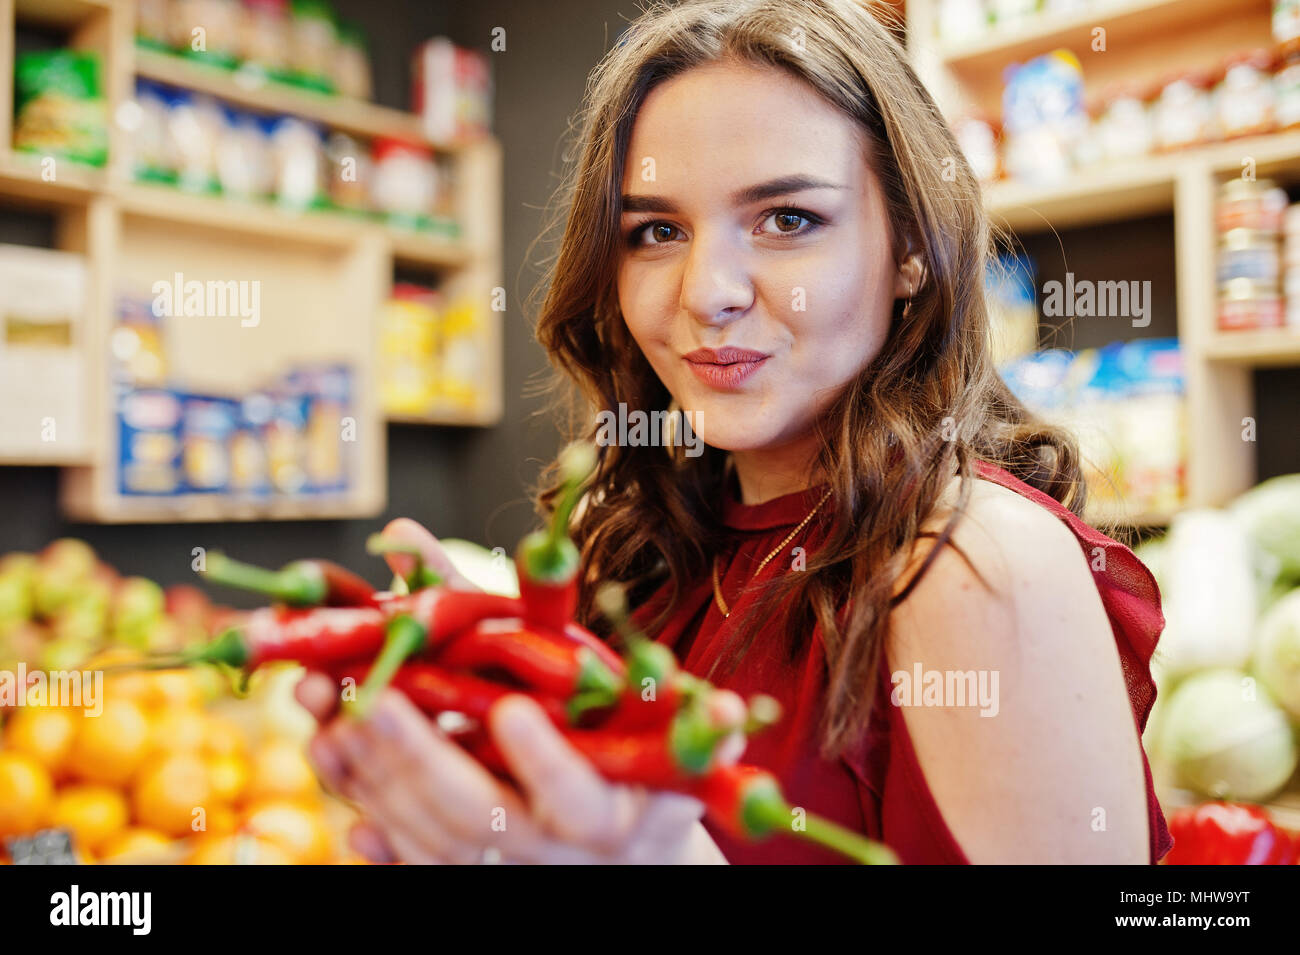 Hot girls at the store images Girl In Red Holding Hot Chili Peppers On Fruits Store Stock Photo Alamy